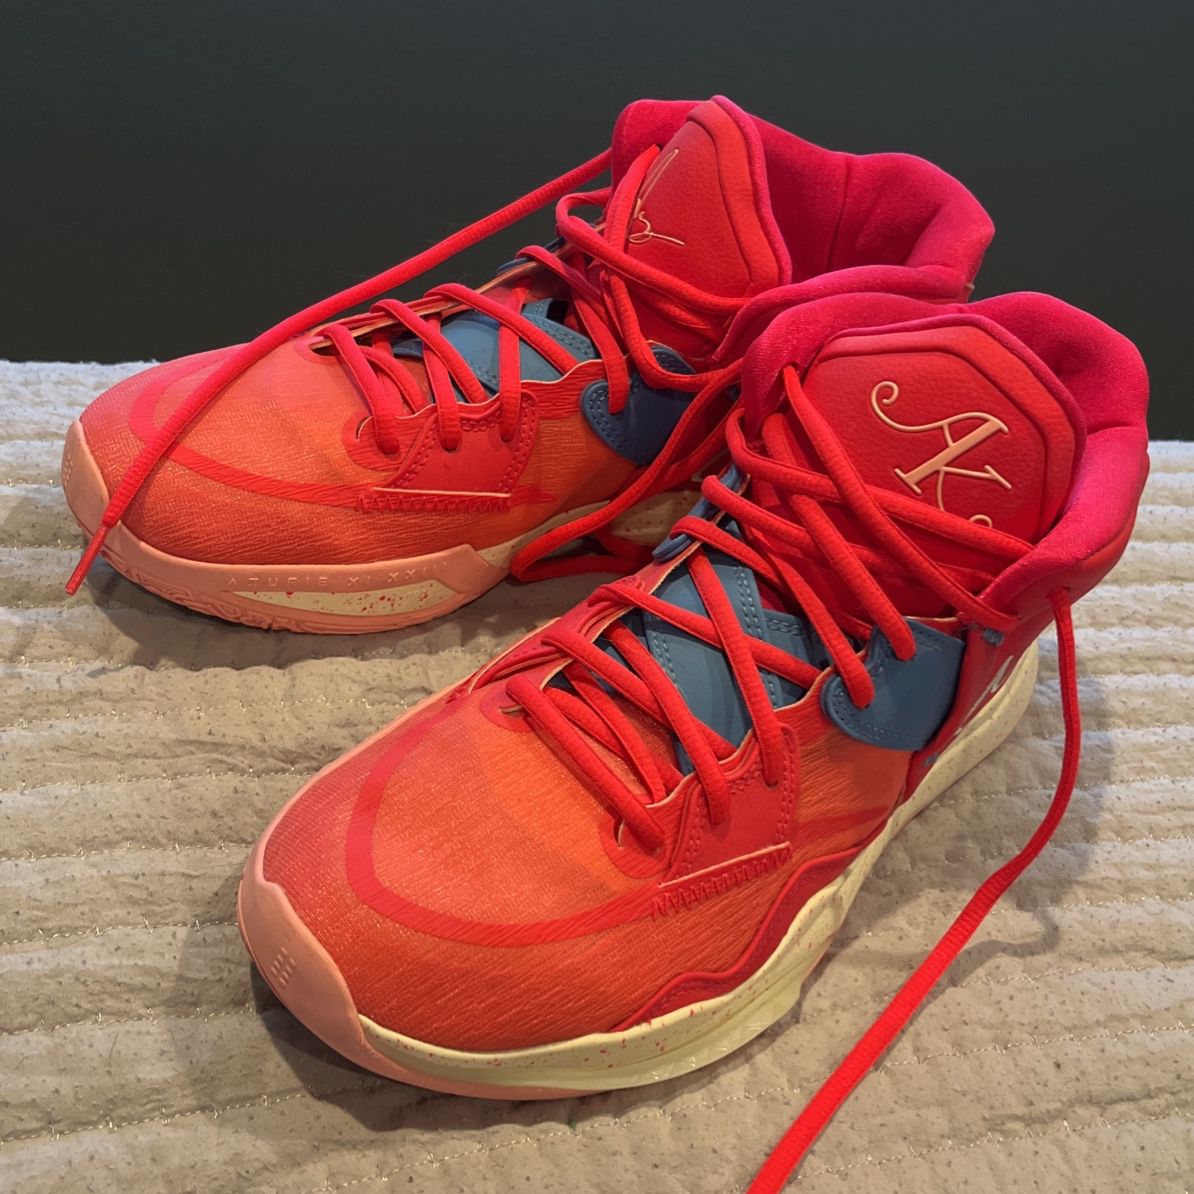 Kyrie infinity siren red